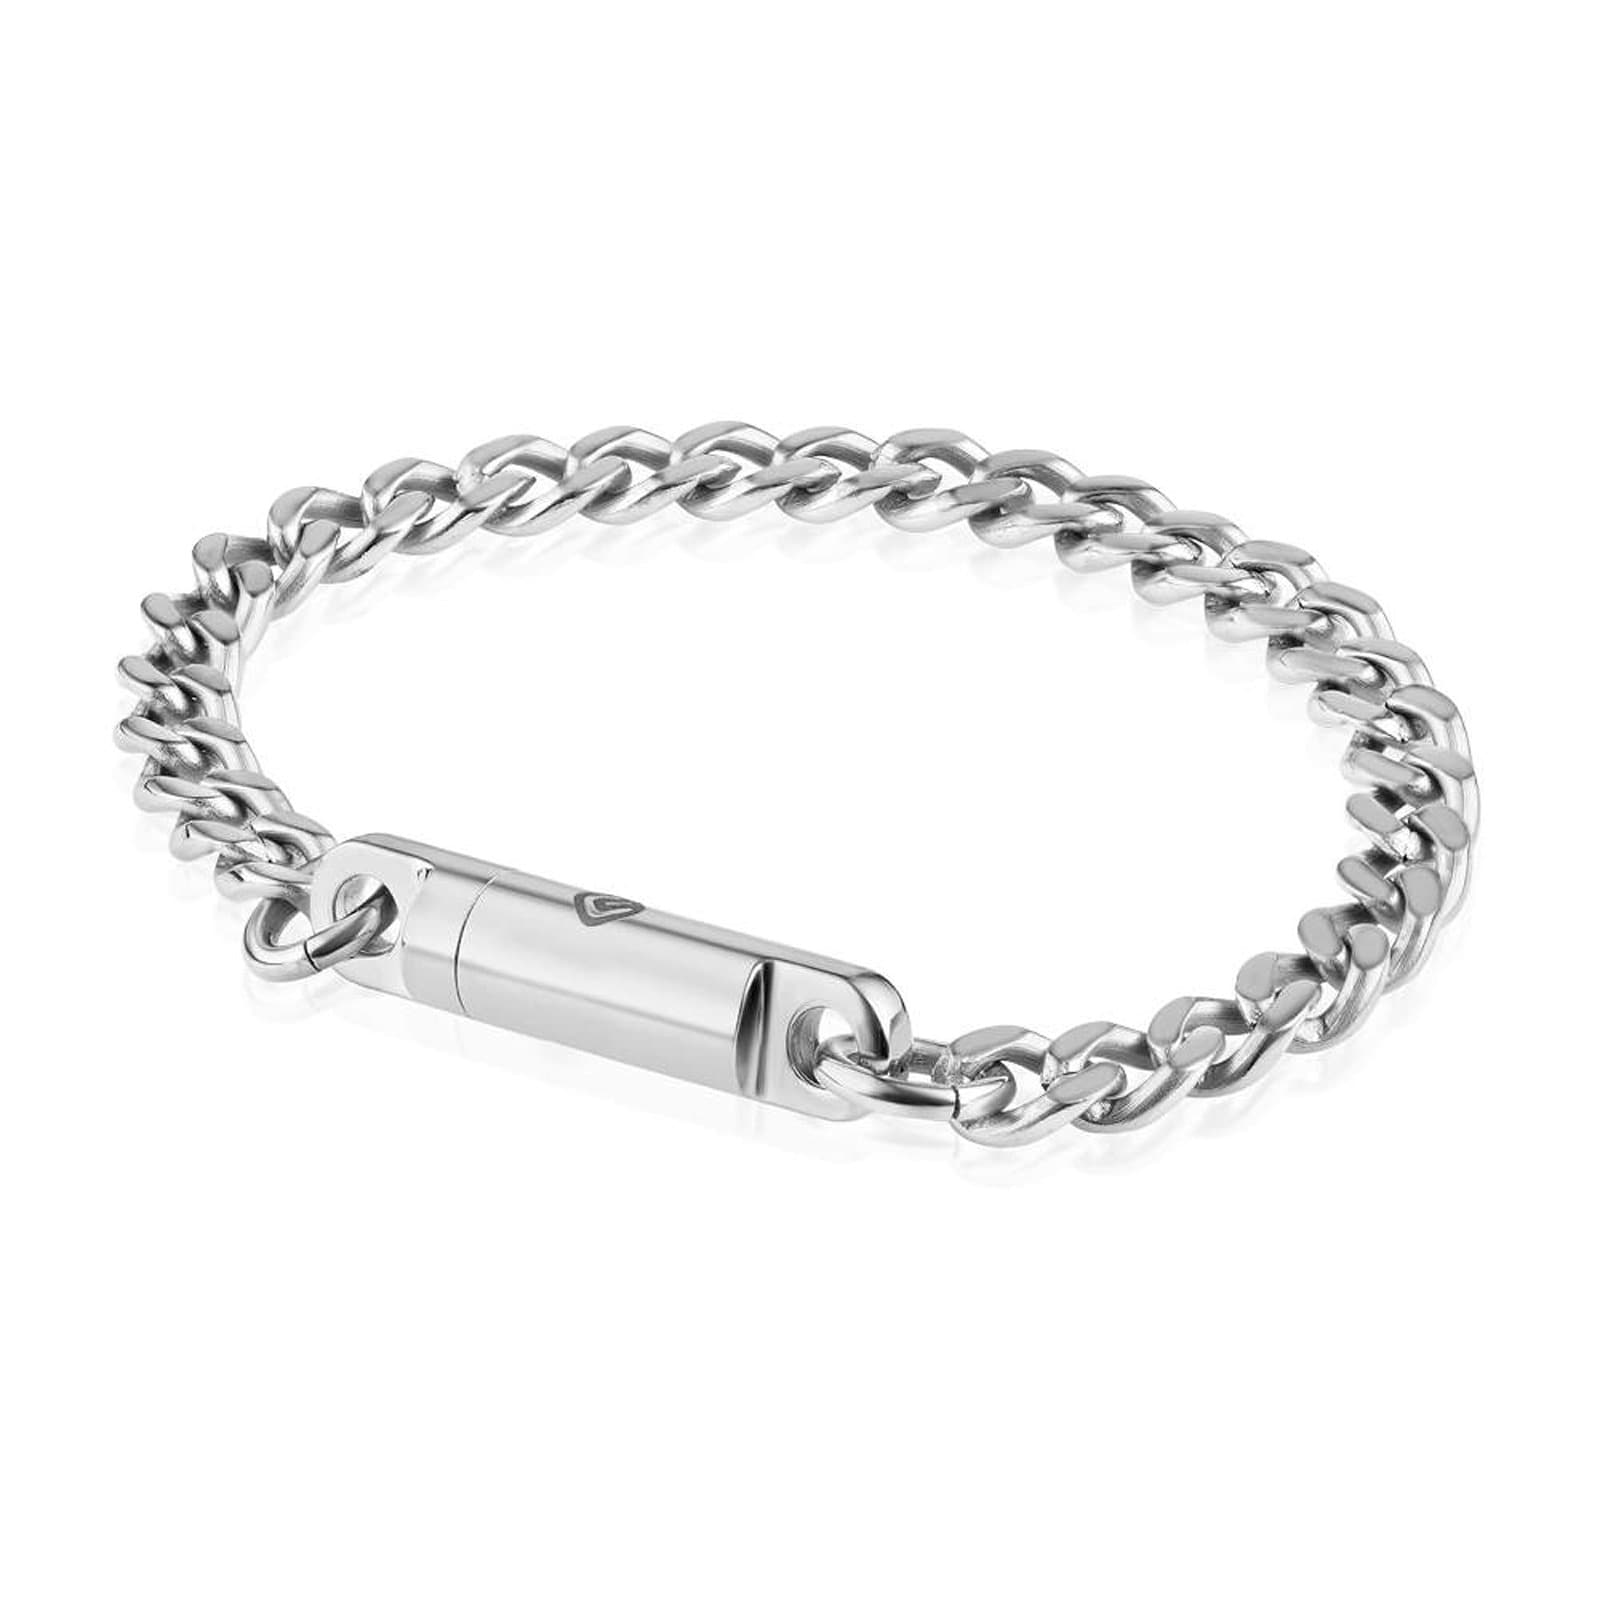 Tiffany & Co Bracelet With Heart Lock and Disc Charm in Yellow Gold | New  York Jewelers Chicago